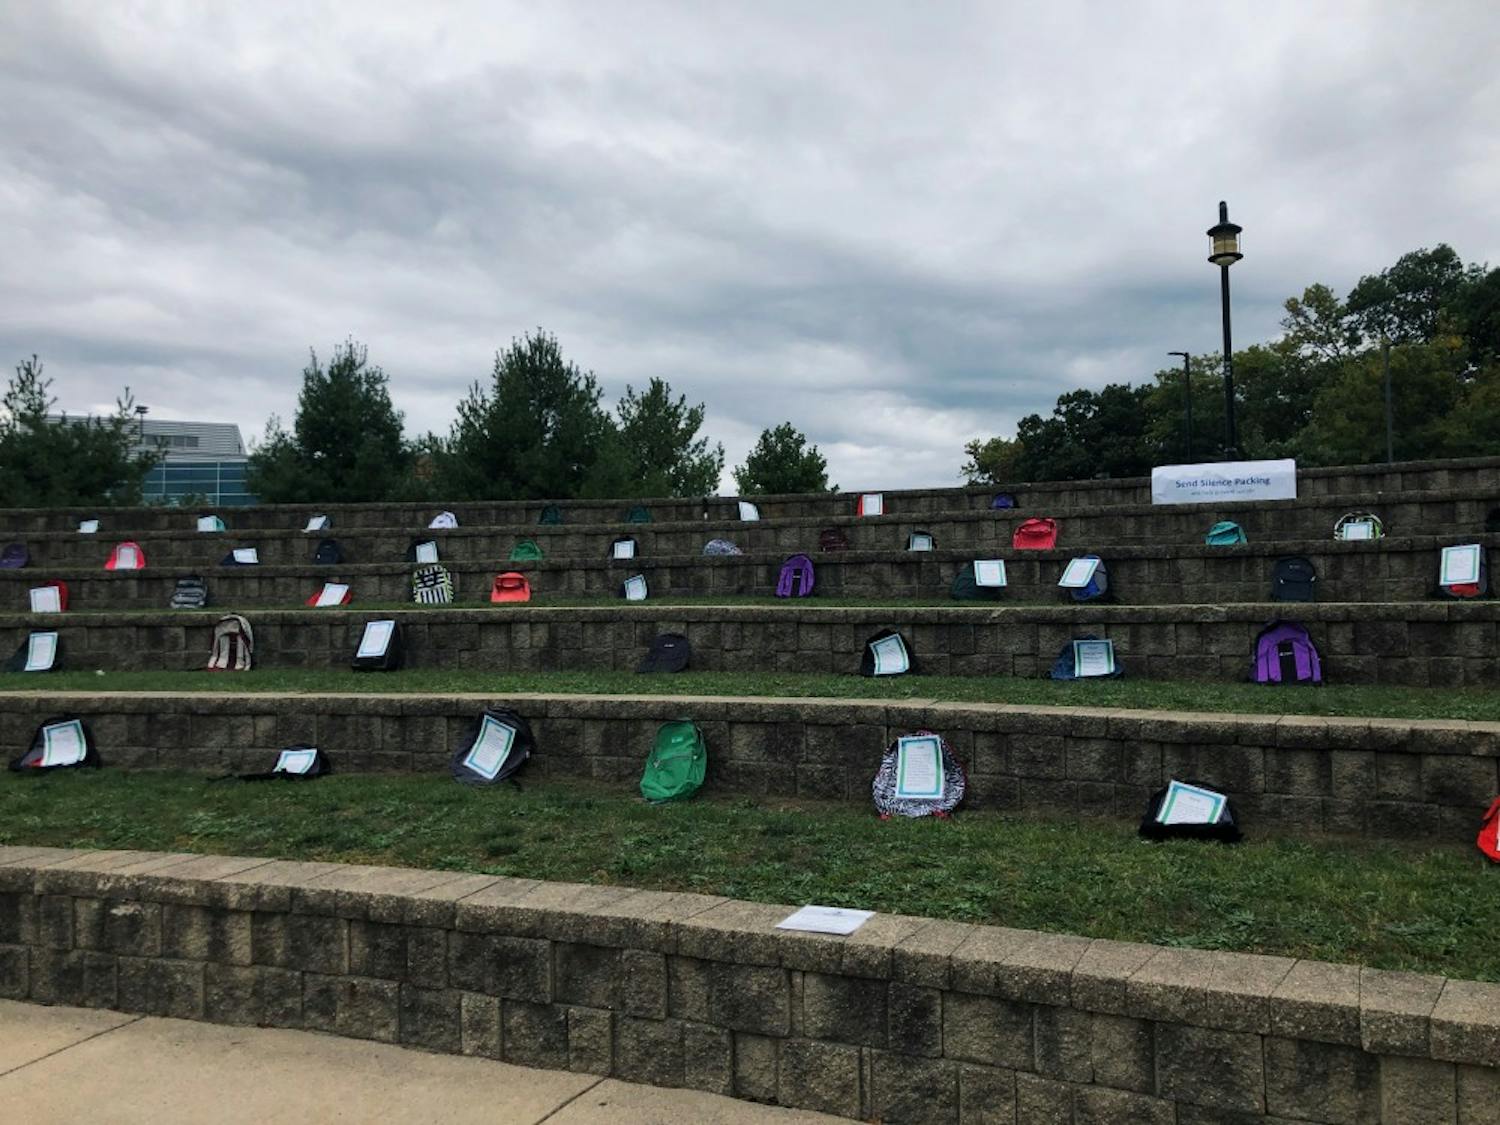 Send Silence Packing display features 110 backpacks to raise awareness for suicide among college students